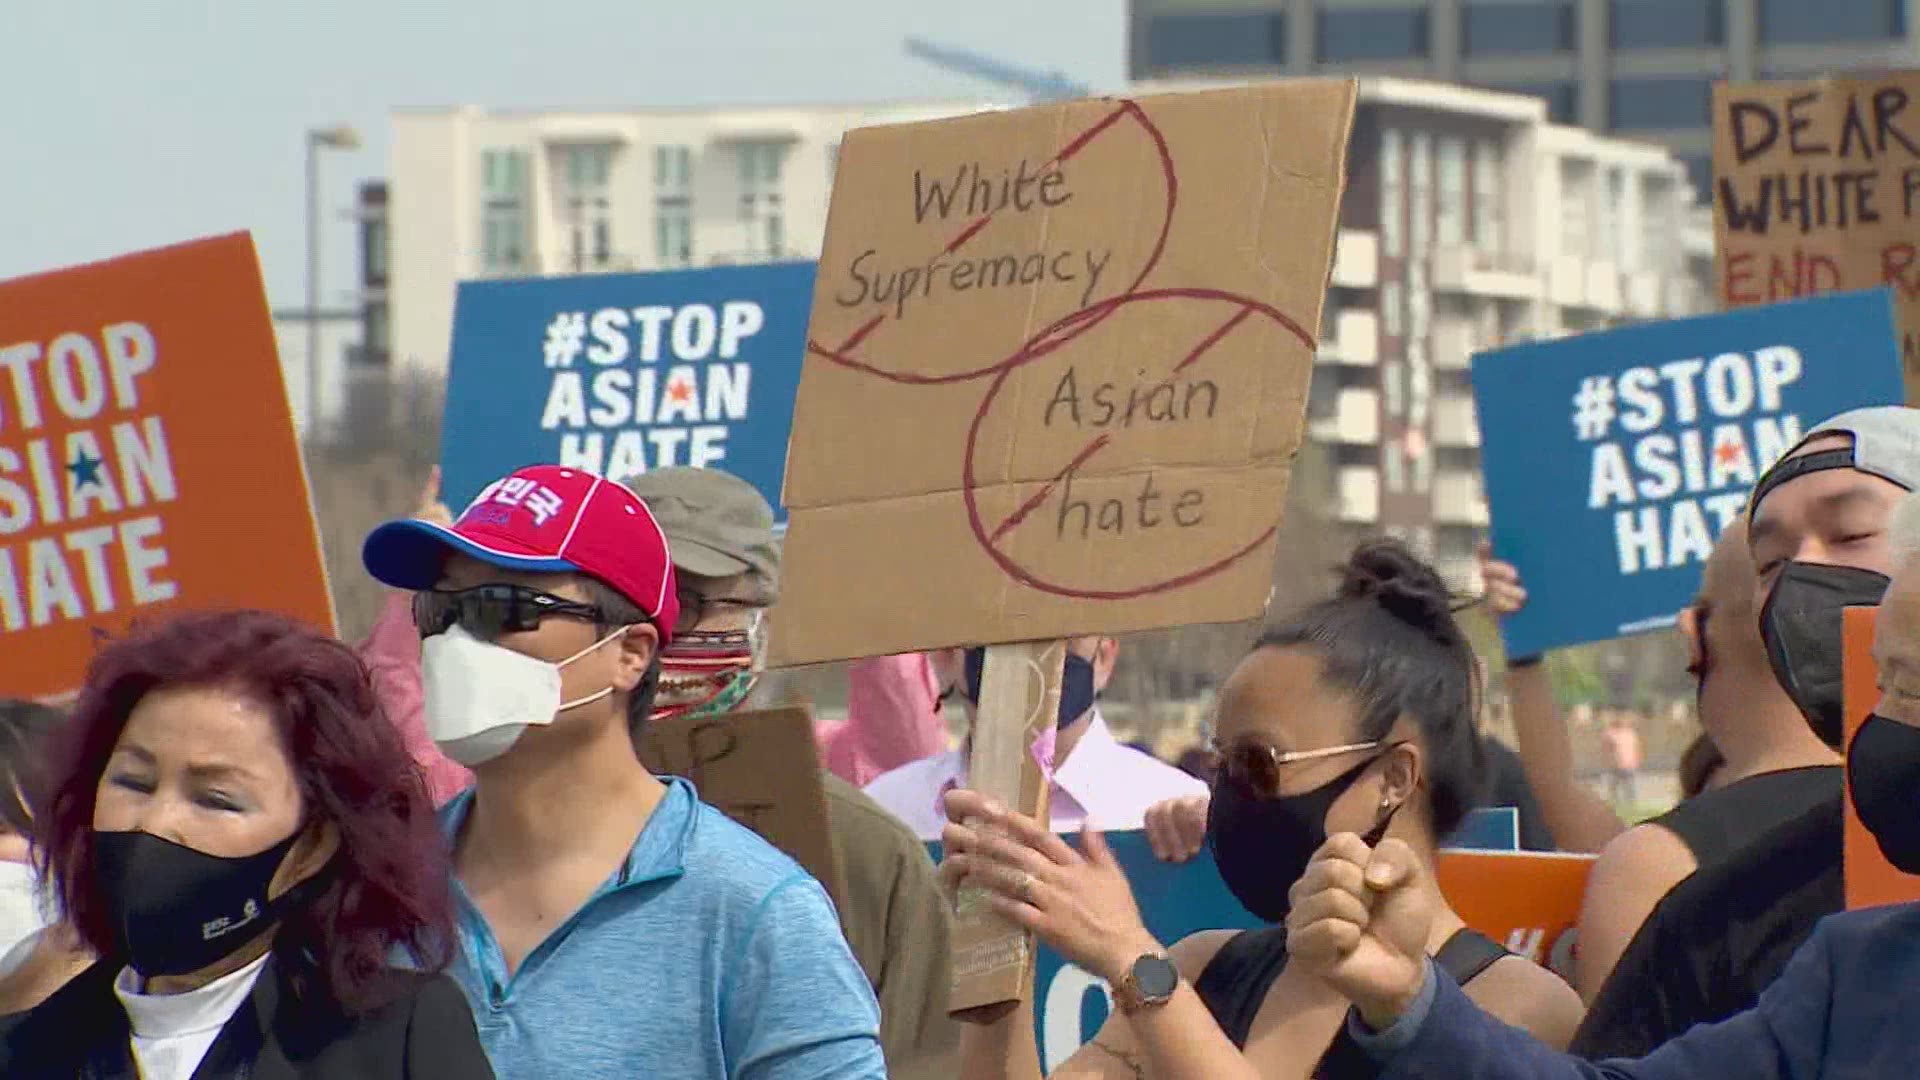 Anti-Asian racism and violence are major concerns across the country.